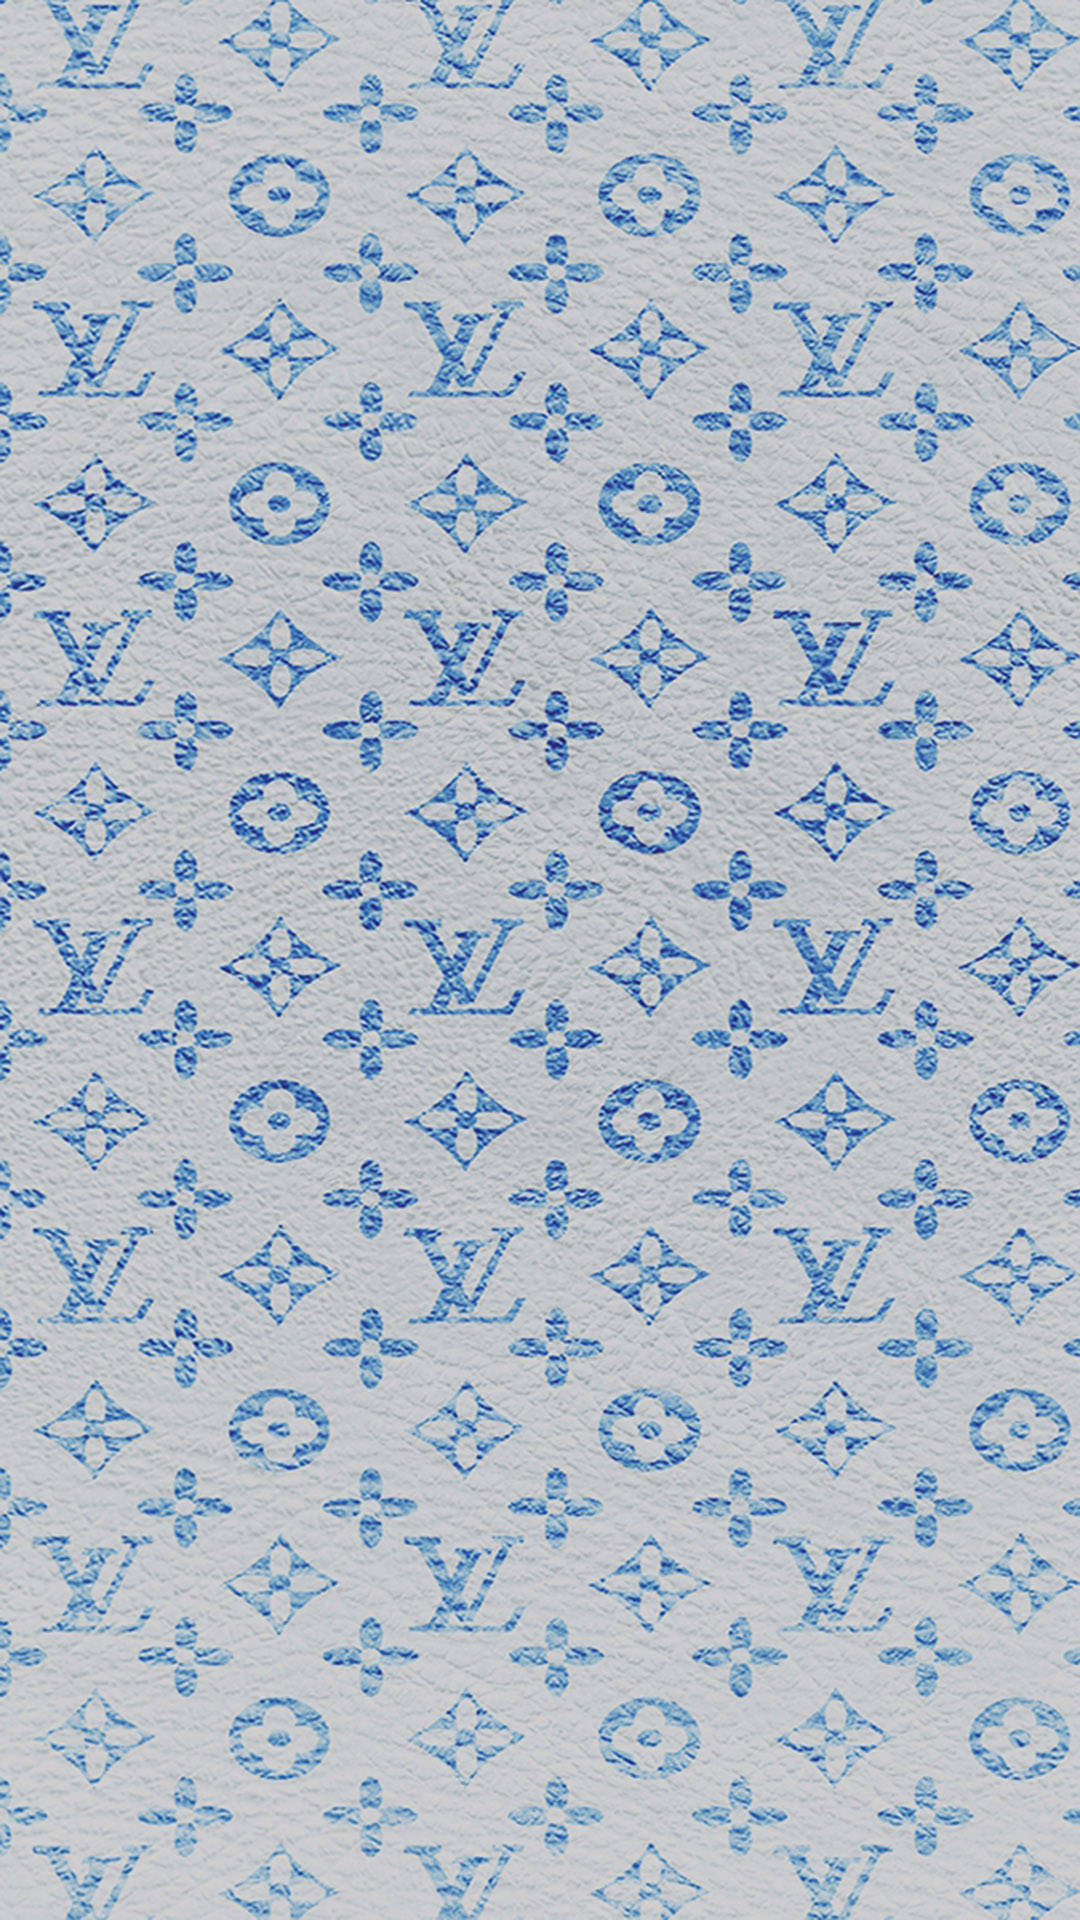 Blue Leather Louis Vuitton Phone Background